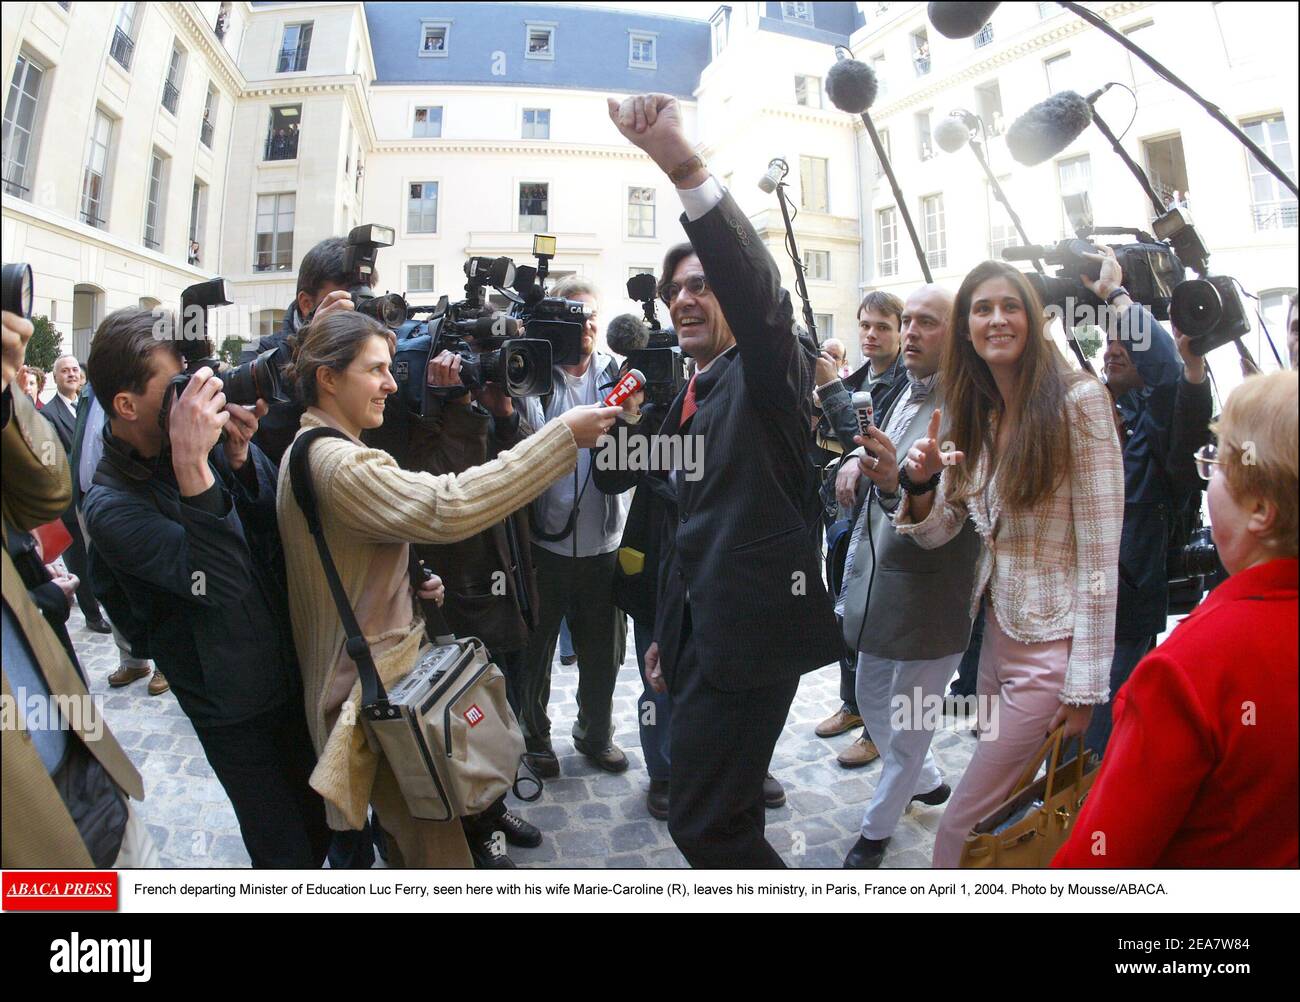 French departing Minister of Education Luc Ferry, seen here with his wife Marie-Caroline (R), leaves his ministry, in Paris, France on April 1, 2004. Photo by Mousse/ABACA. Stock Photo